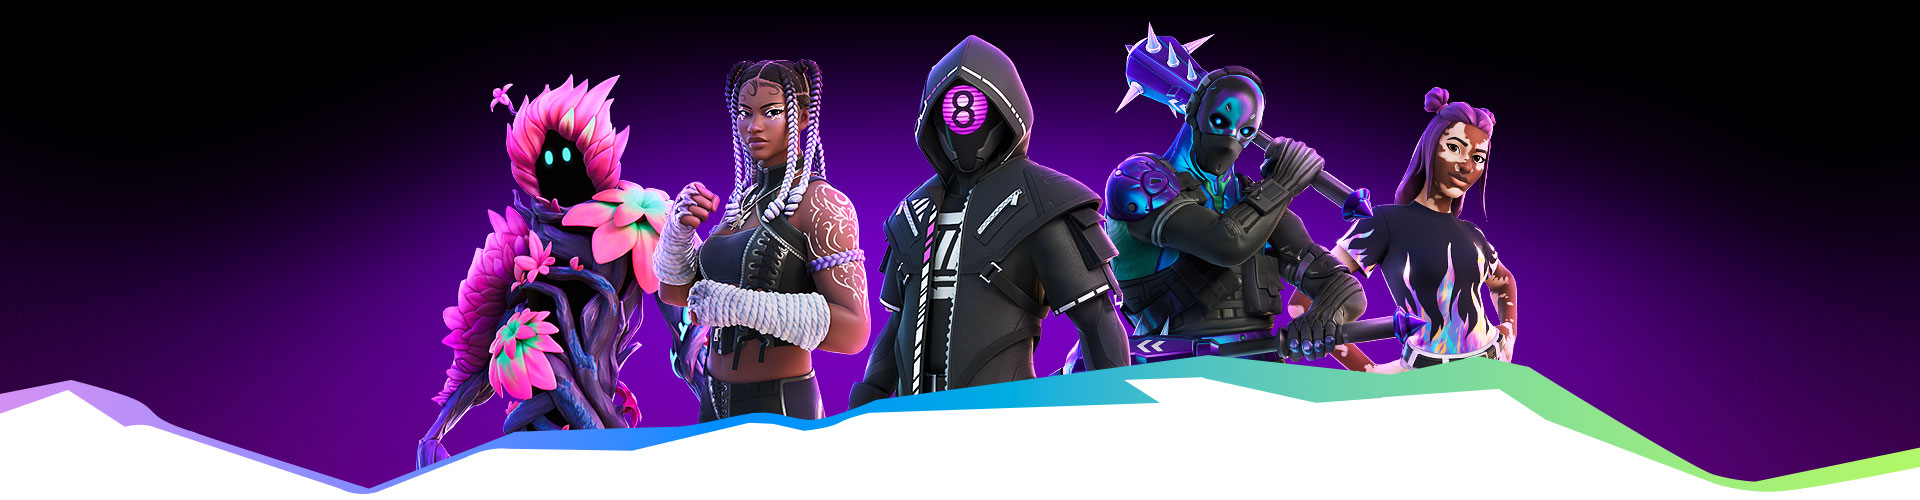 Five Fortnite characters wearing purple themed skins pose together